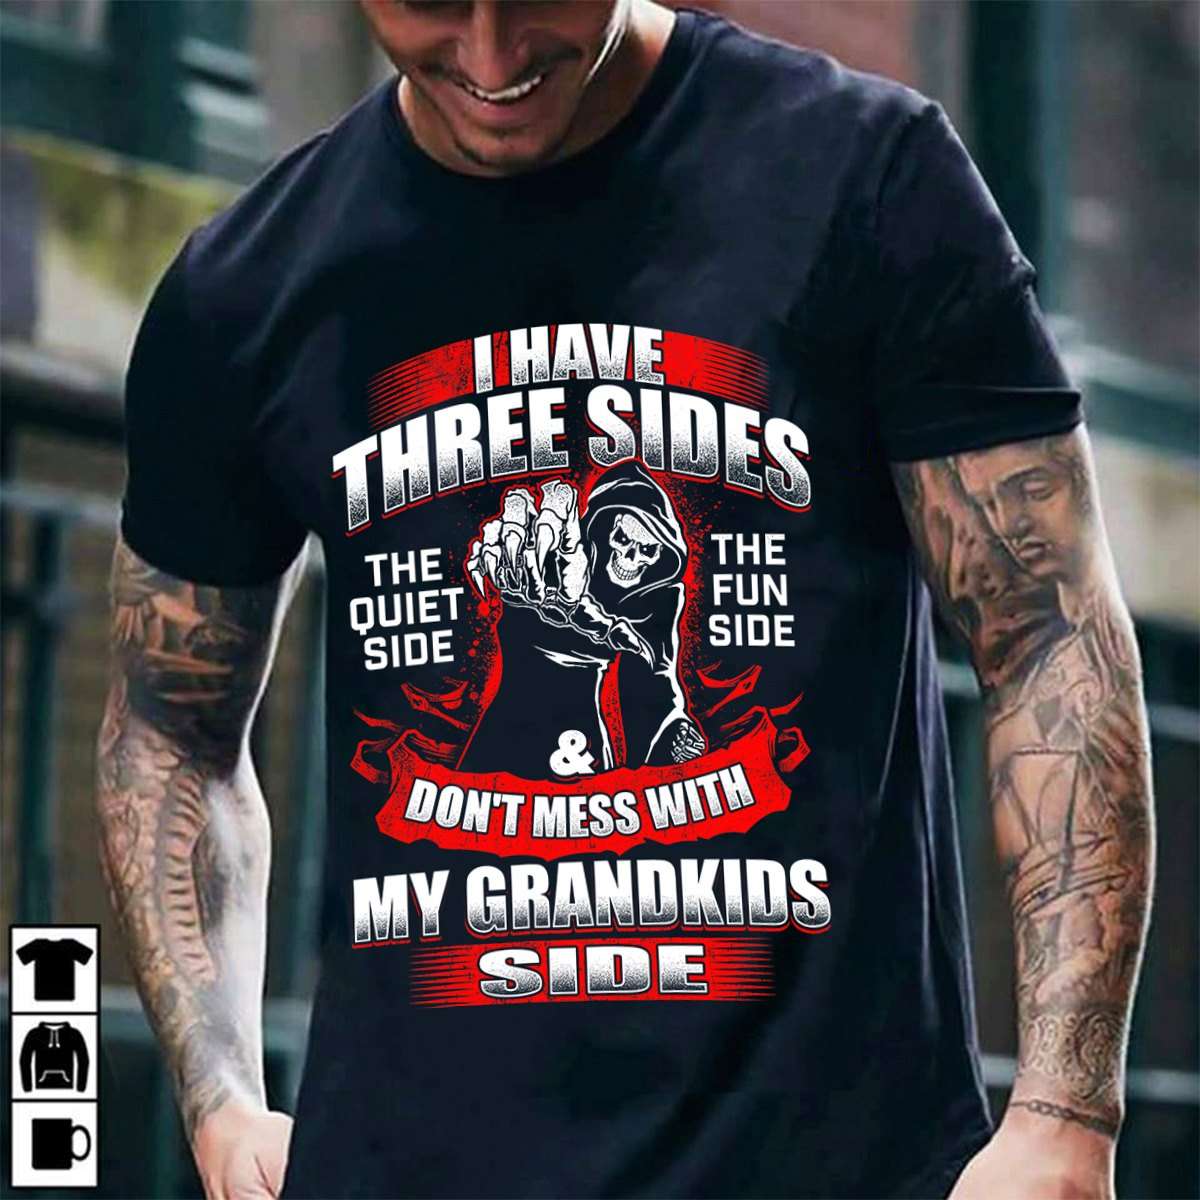 I have three sides - The quiet side, the fun side and don't mess with my grandkids side